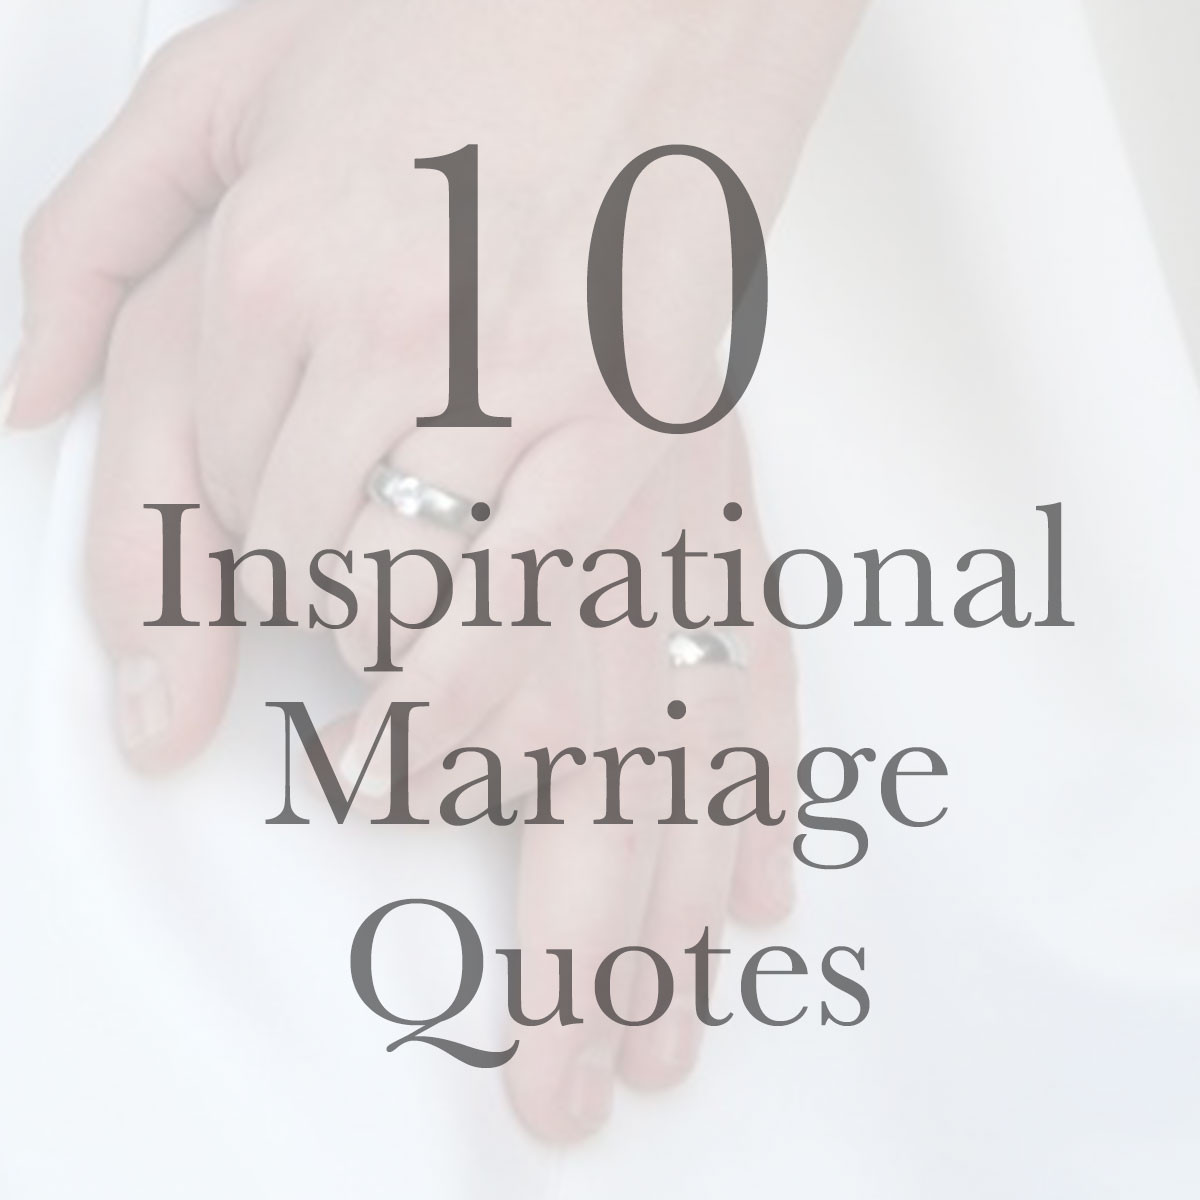 Encouraging Marriage Quotes
 marriage quotes